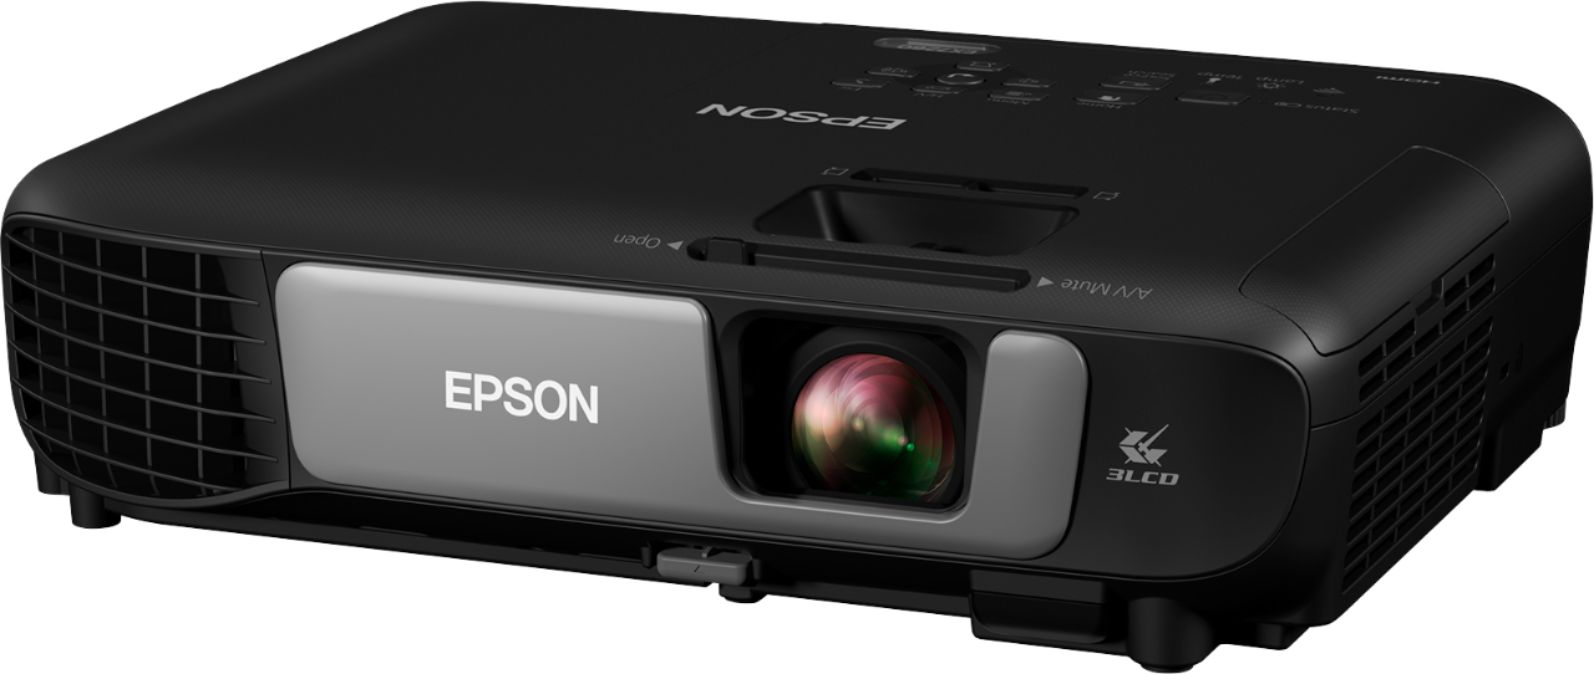 Left View: Epson - Pro EX7260 720p 3LCD Projector - Black